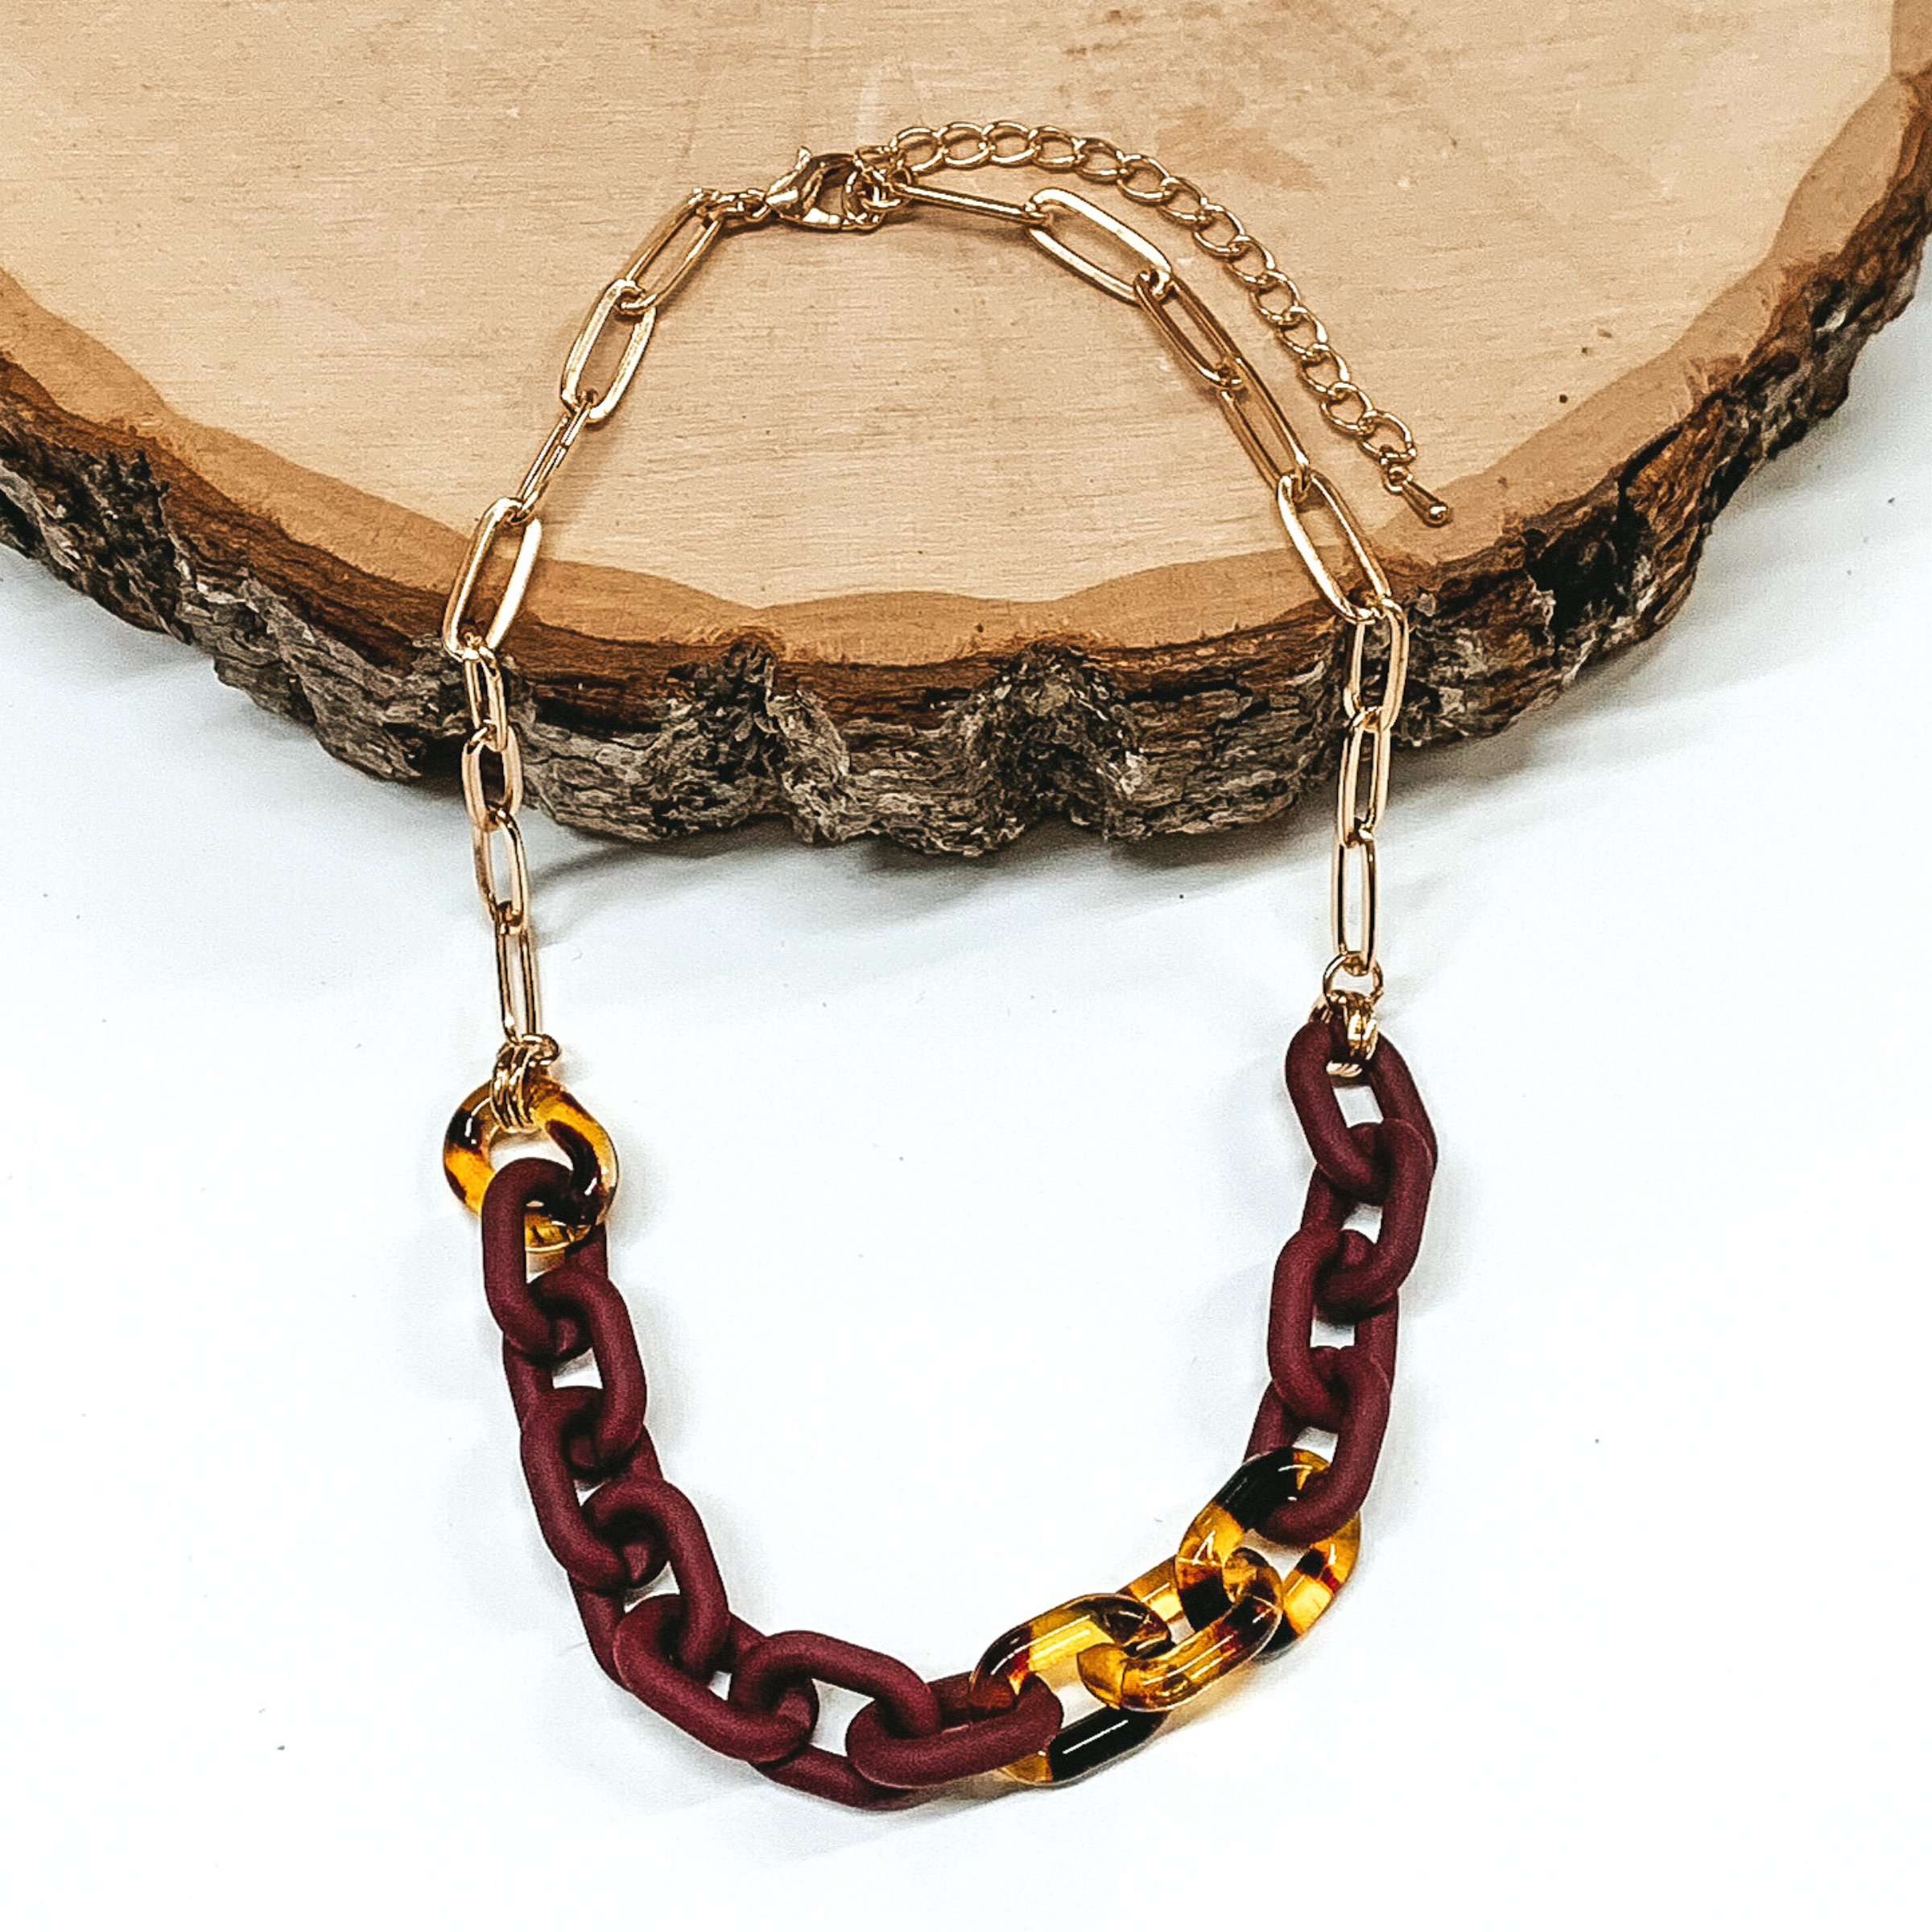 Half gold paper clip chain necklace. The other half is a thick matte maroon chain with a few links on tortoise shell links. This necklace is pictured partially laying on a piece of wood on a white background. 